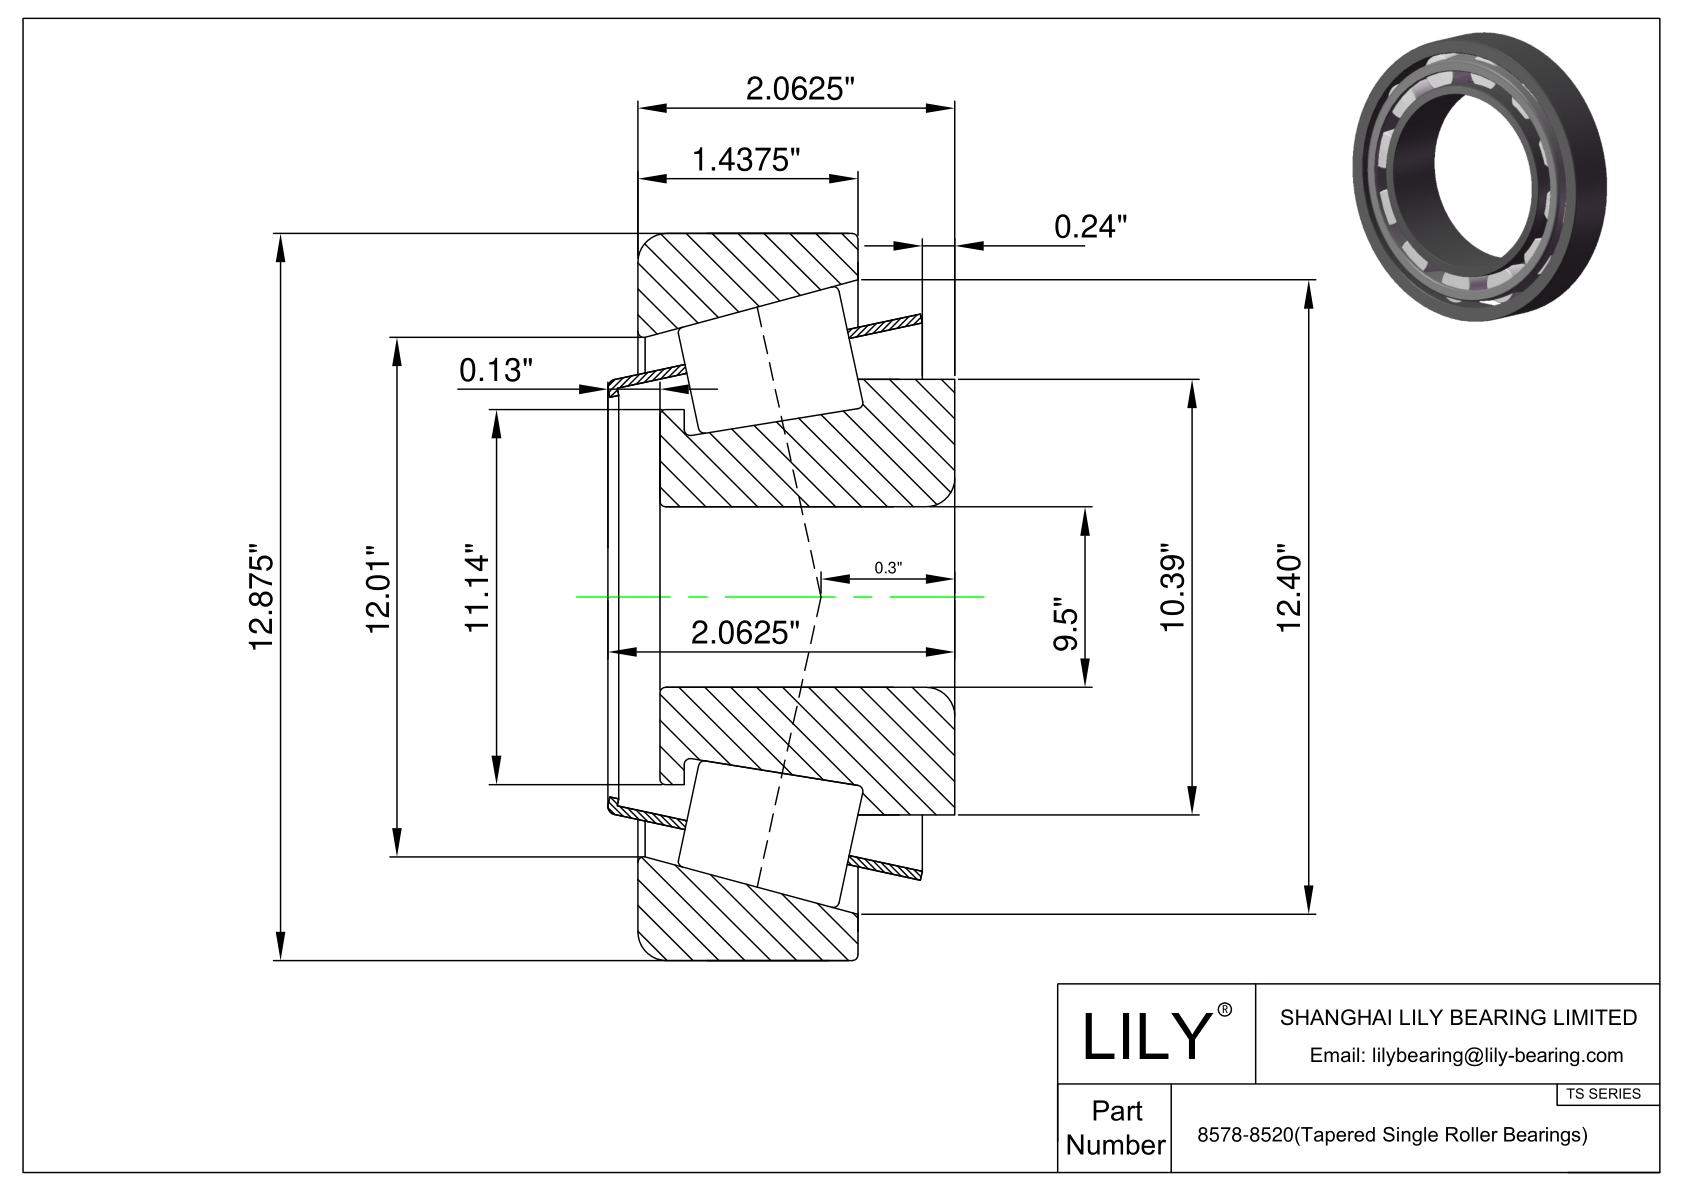 8578-8520 TS (Tapered Single Roller Bearings) (Imperial) cad drawing